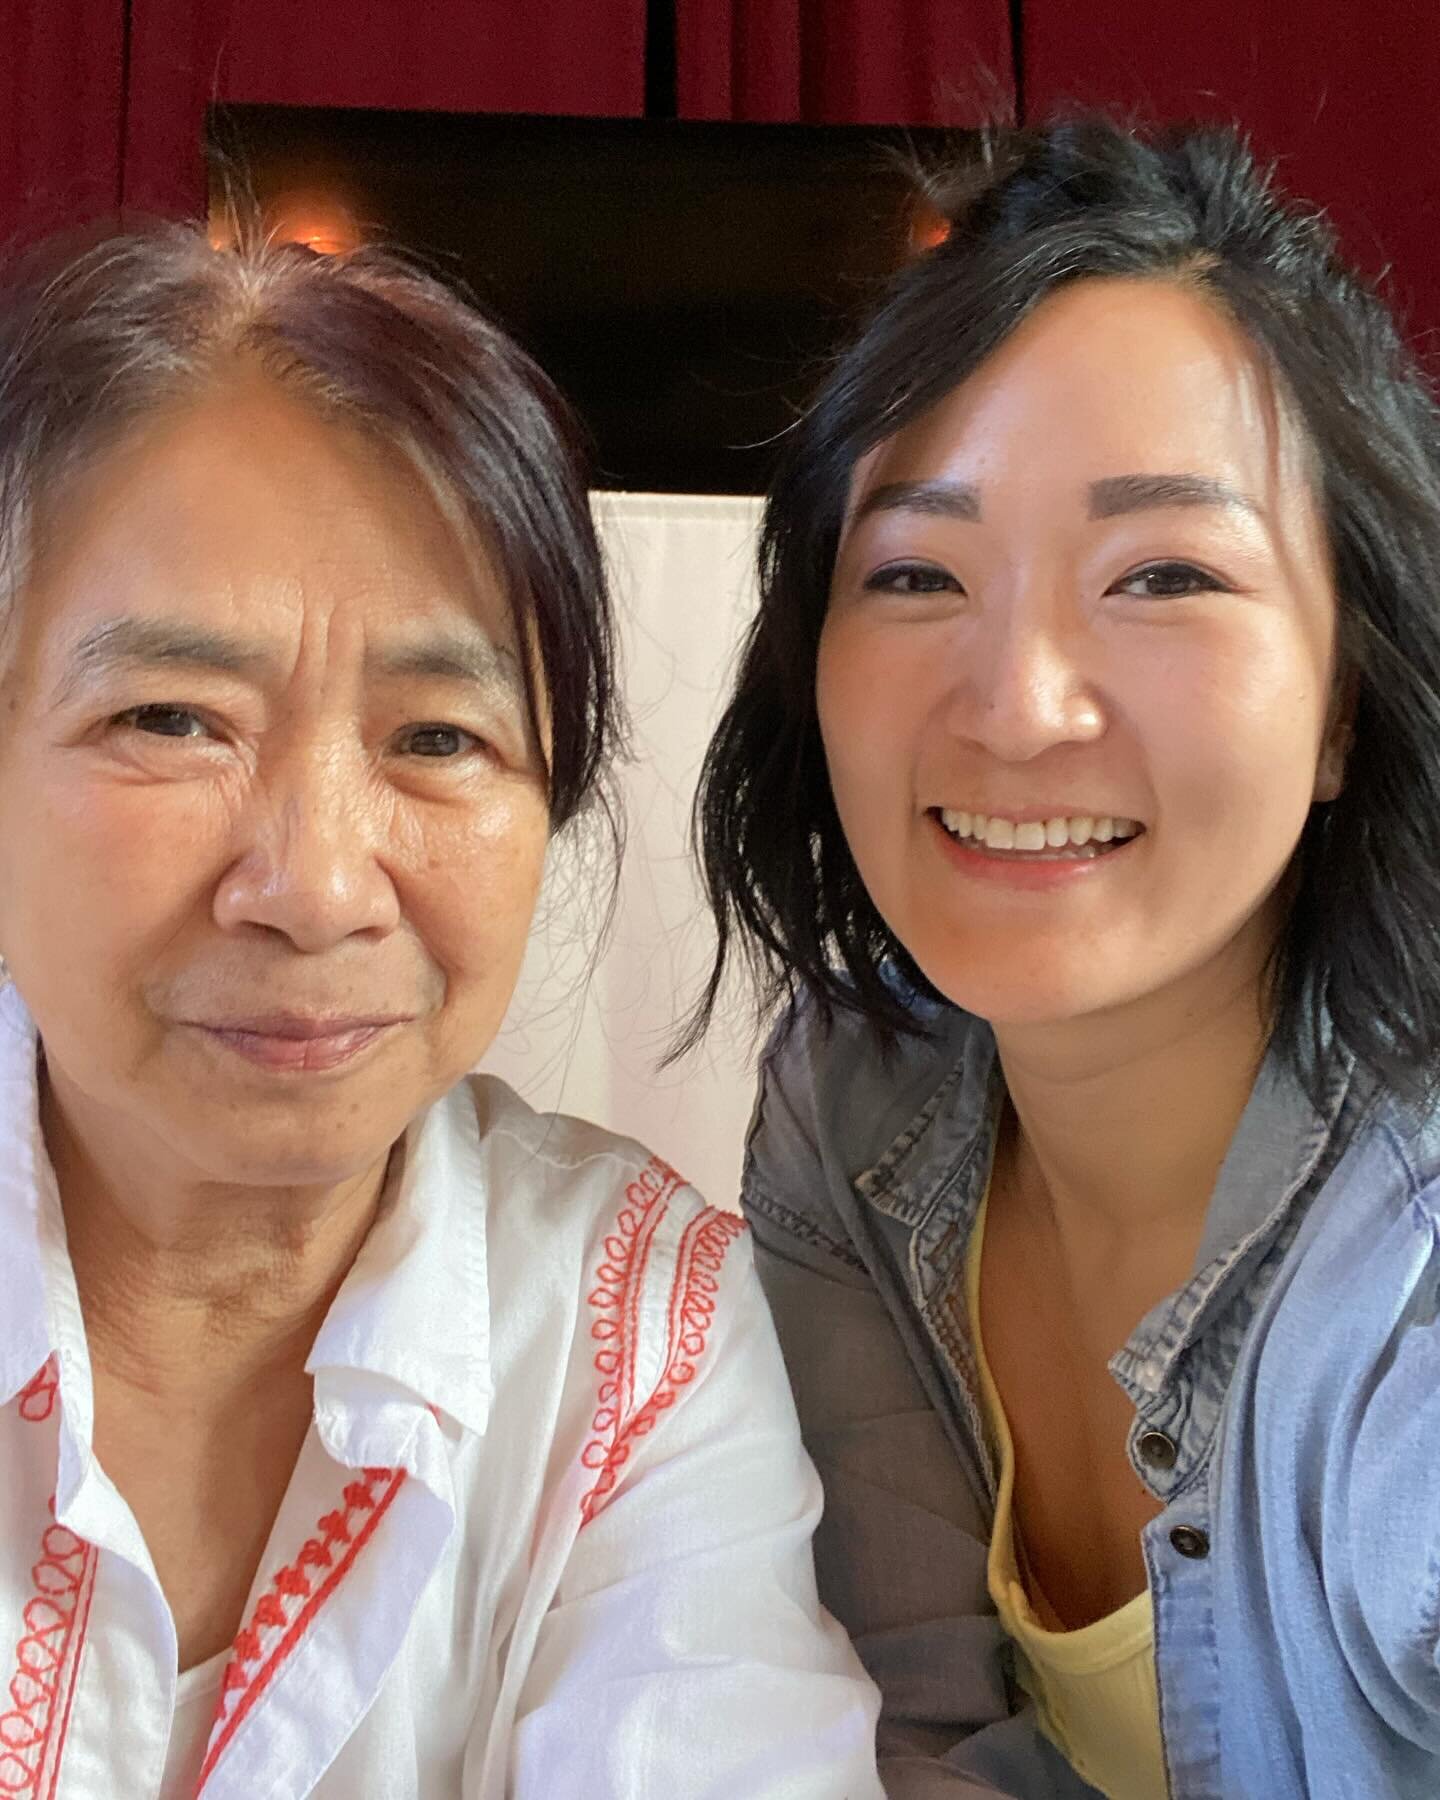 What a weekend! Never a dull moment when you&rsquo;re learning from the great Kiiko Matsumoto ❤️

Thank you for all that you do in our acu community and also connecting both western and eastern medicine together, educating not just acupuncturists but